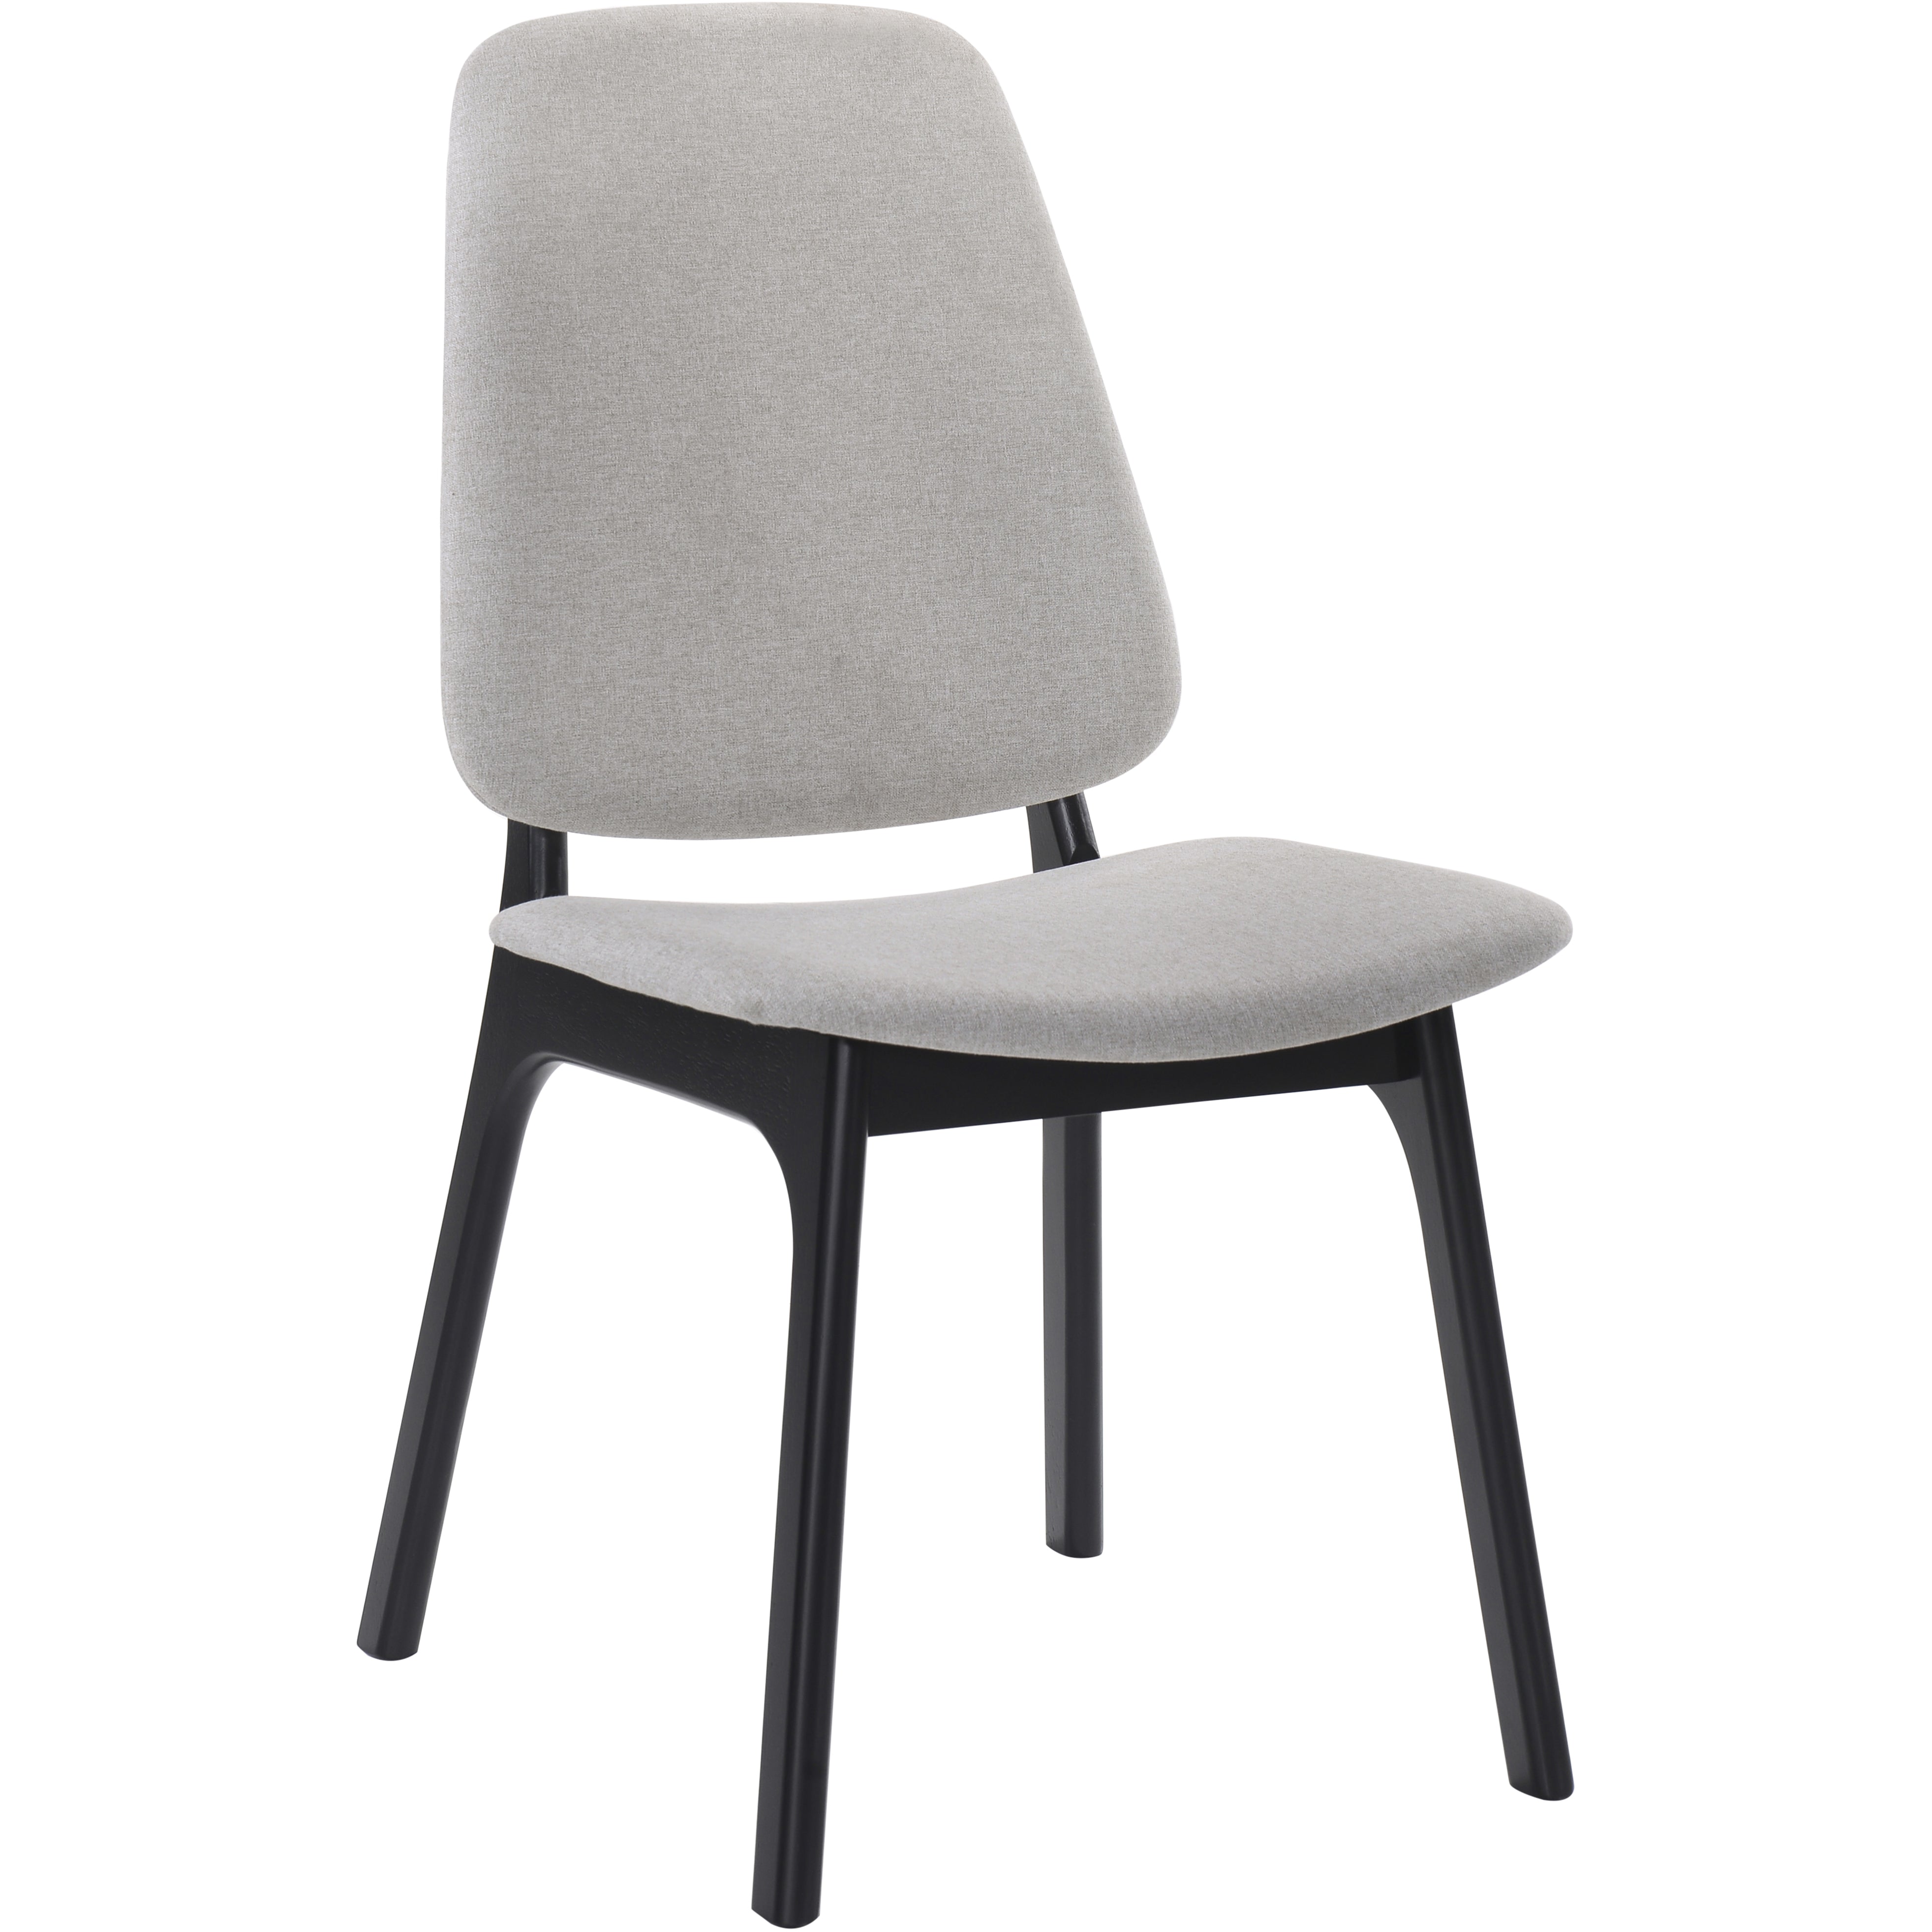 Loren Dining Side Chair (Set of 2) - Perry/Black